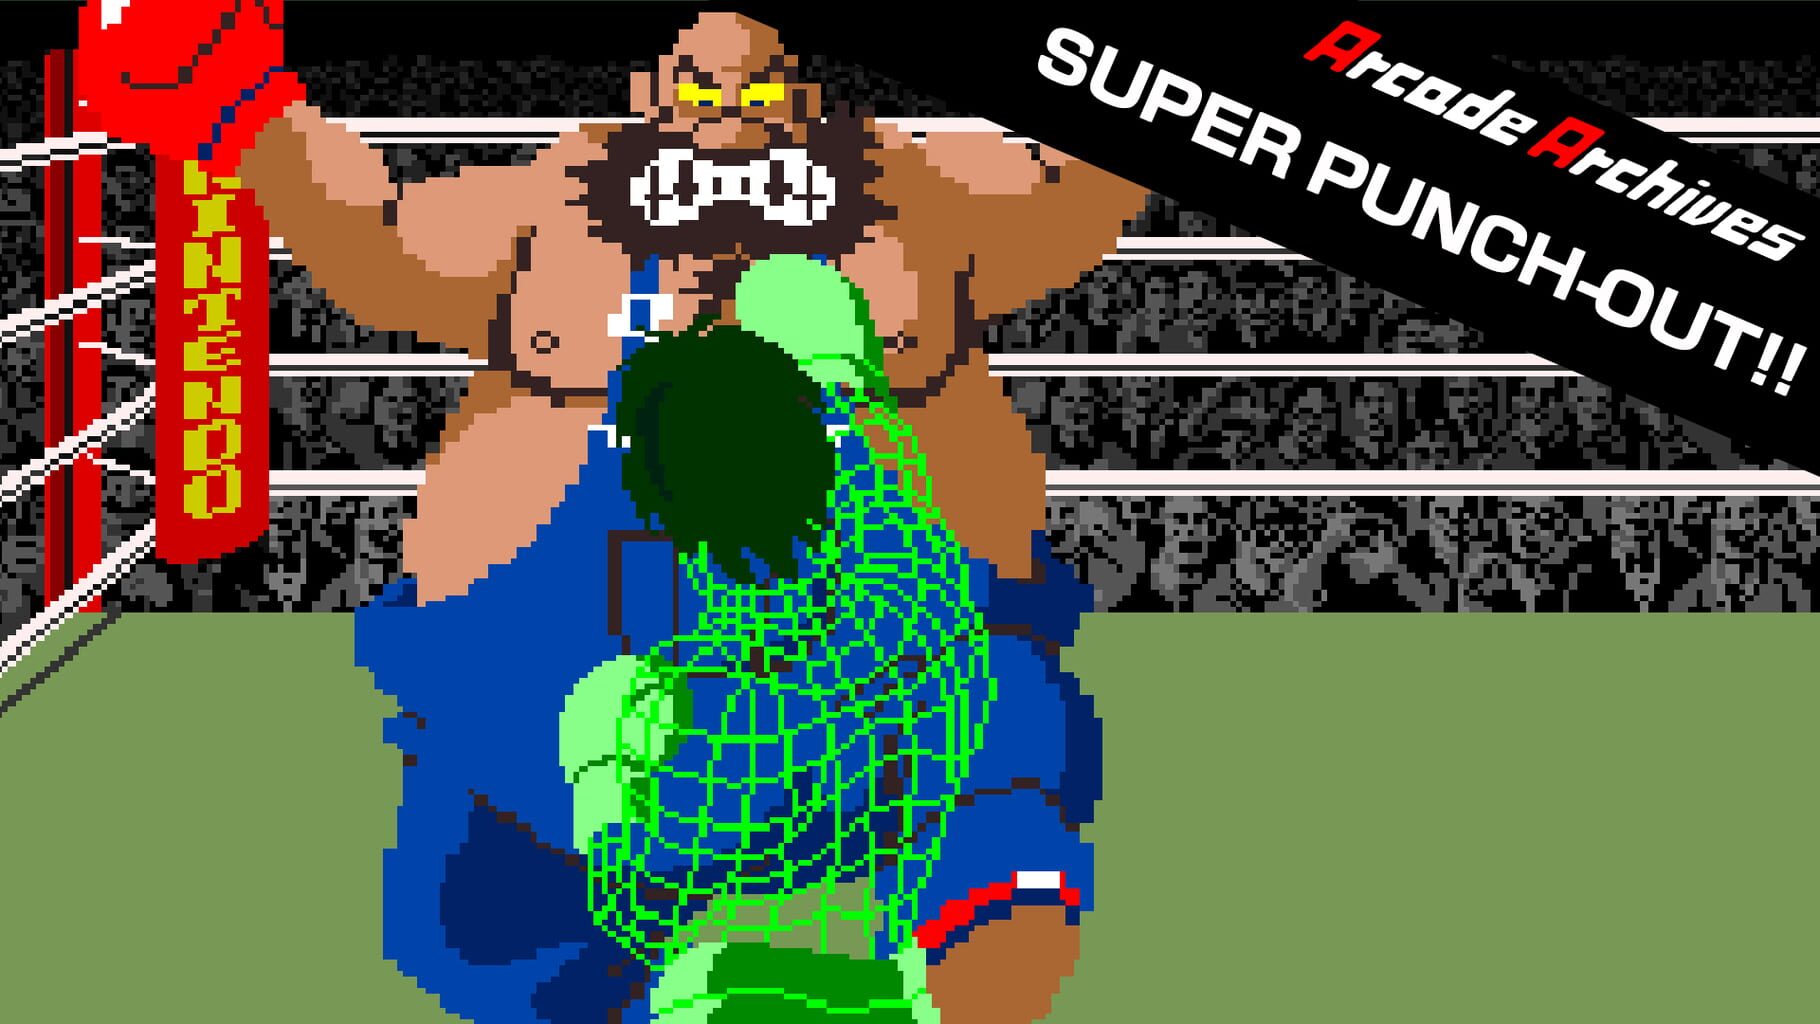 Arcade Archives: Super Punch-Out!! artwork